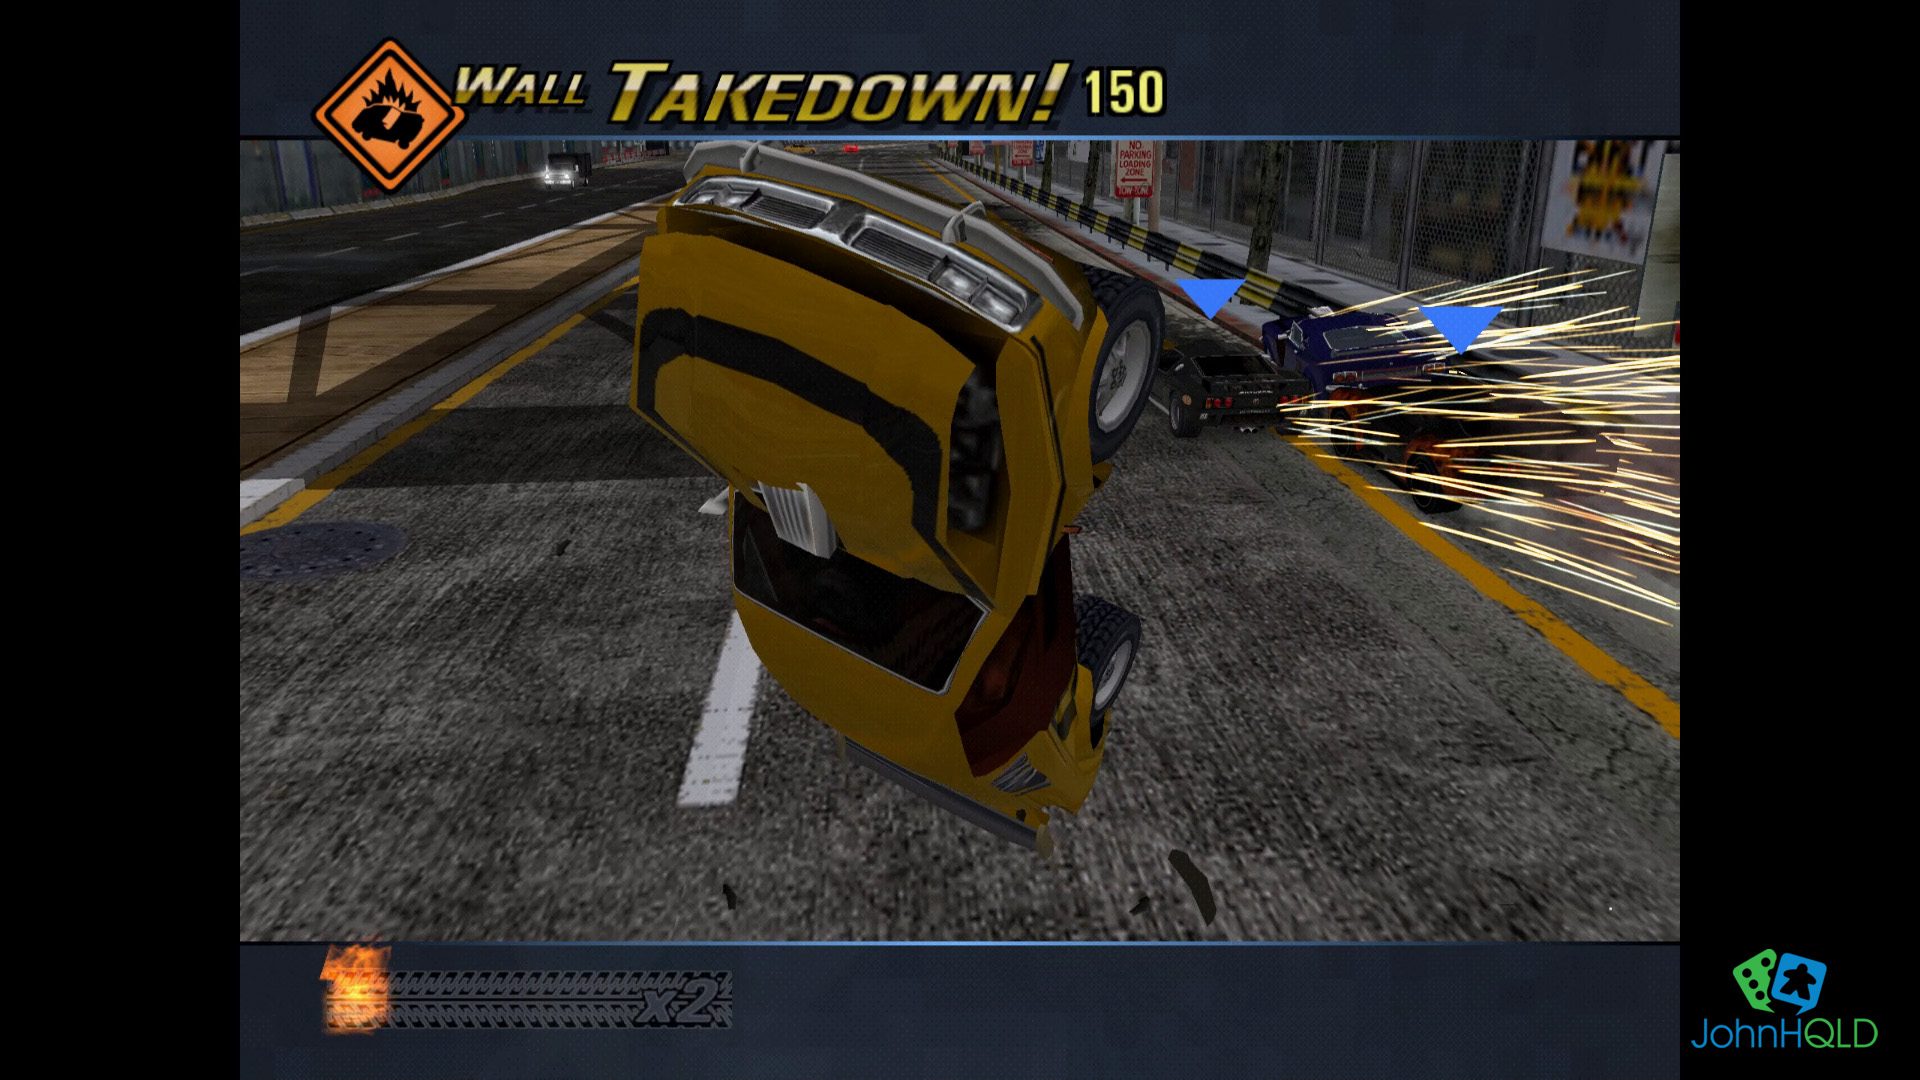 20220919 - Burnout 3 - Oh no I need to drive into lots of other cars for fun